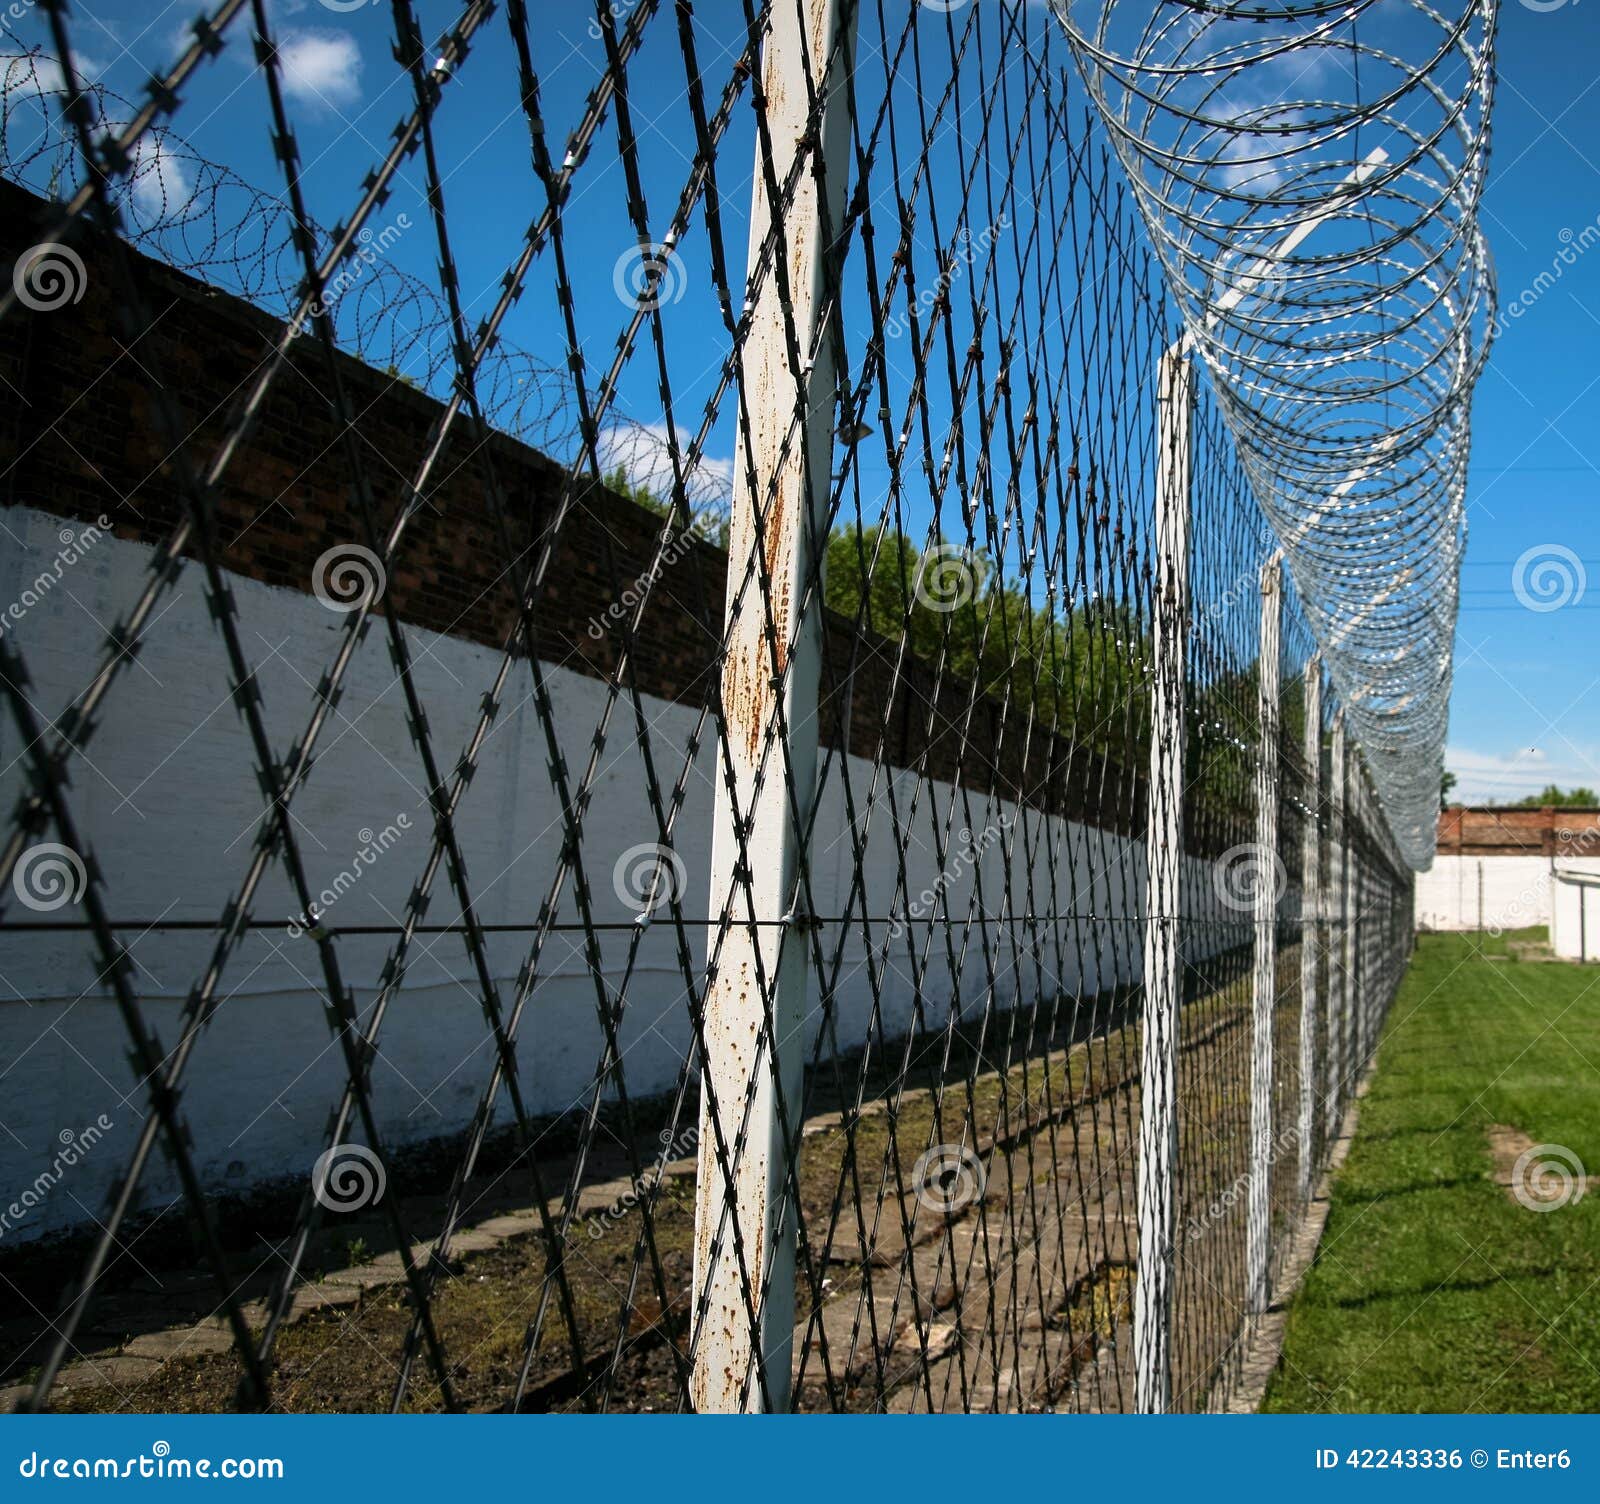 Prison security facilities. Barbed-wire and brick walls in order to secure prison area.